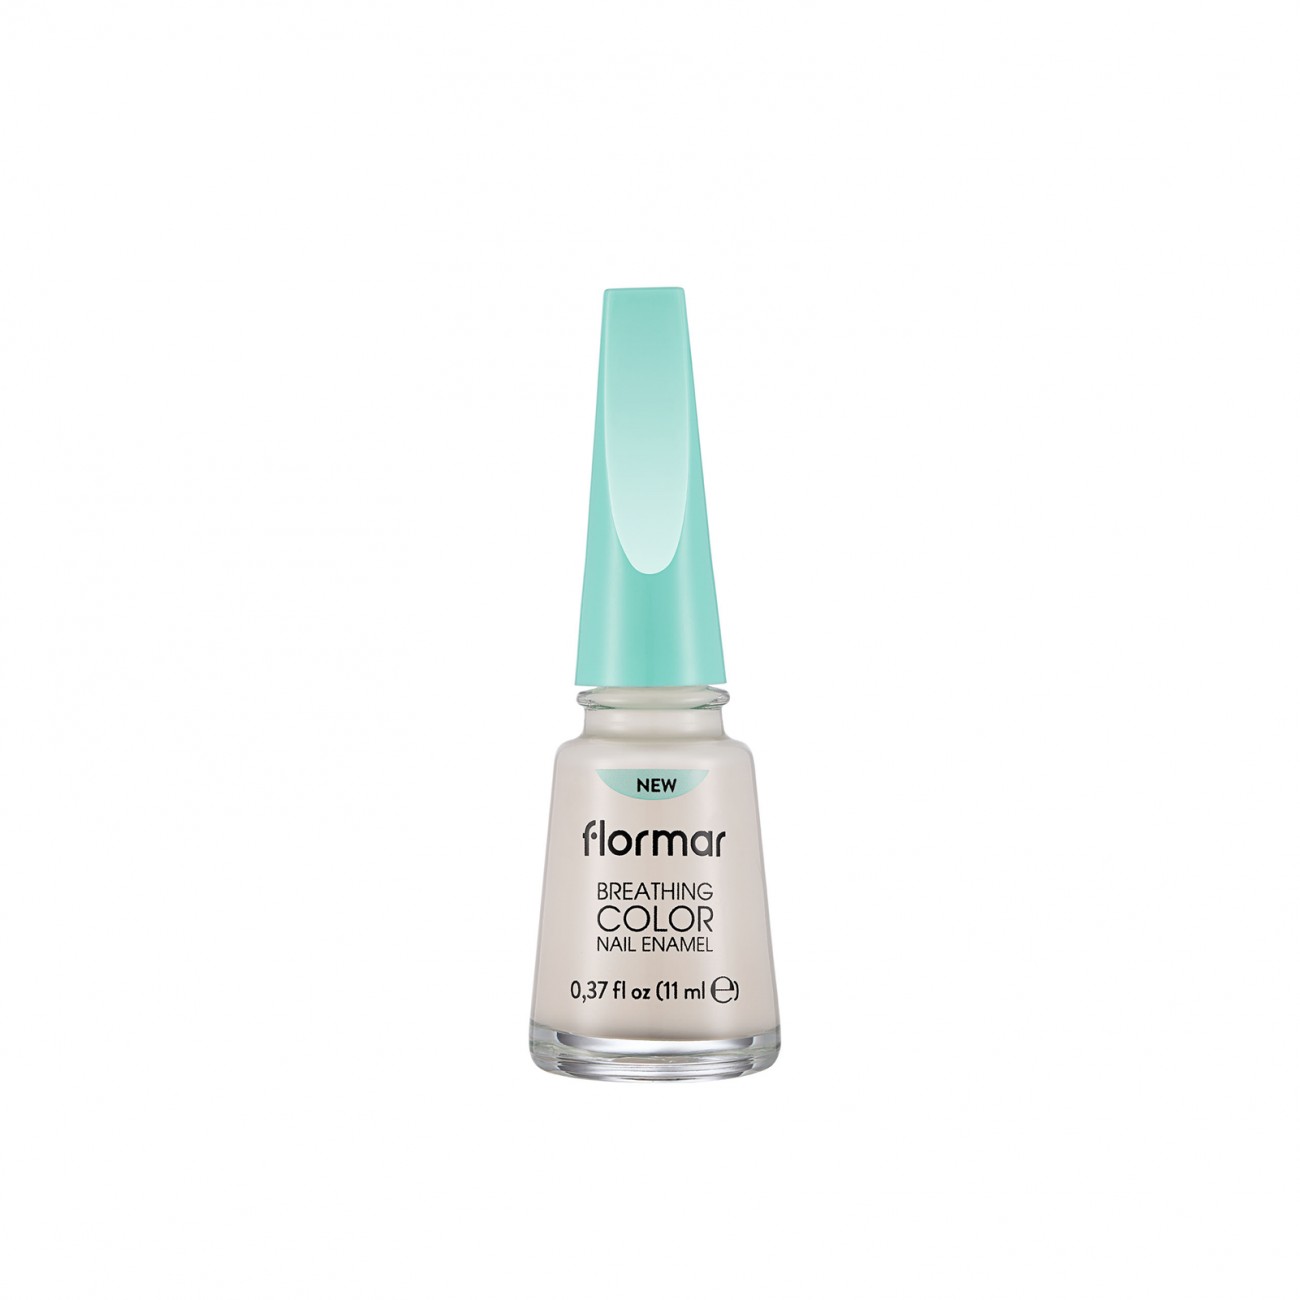 Jelly look Nail Polish By Flormar  YouTube